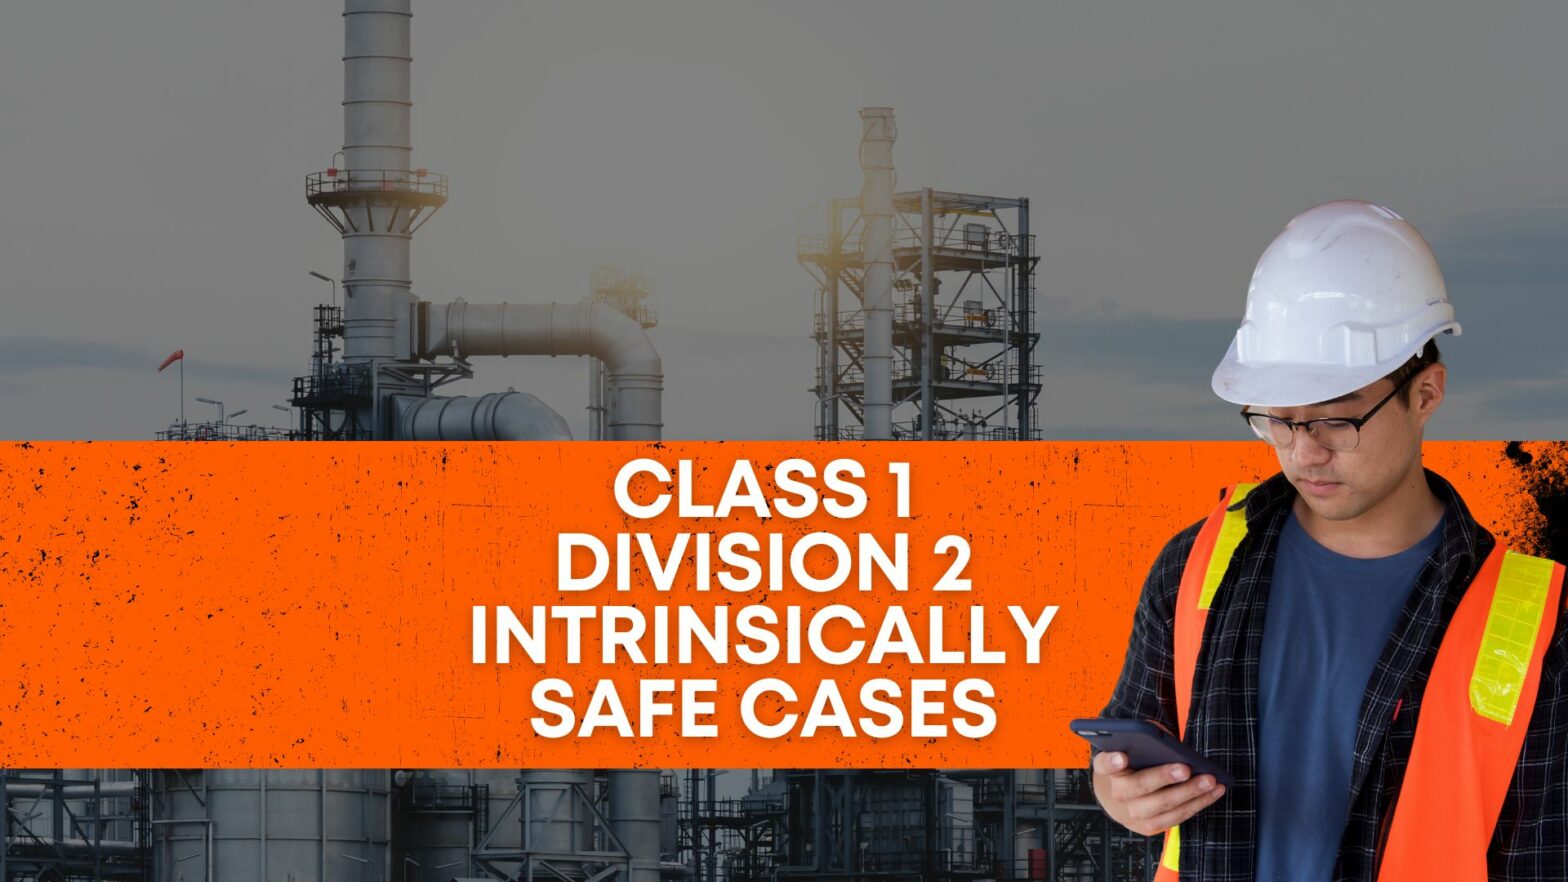 Class 1 Division 2 Intrinsically Safe cases